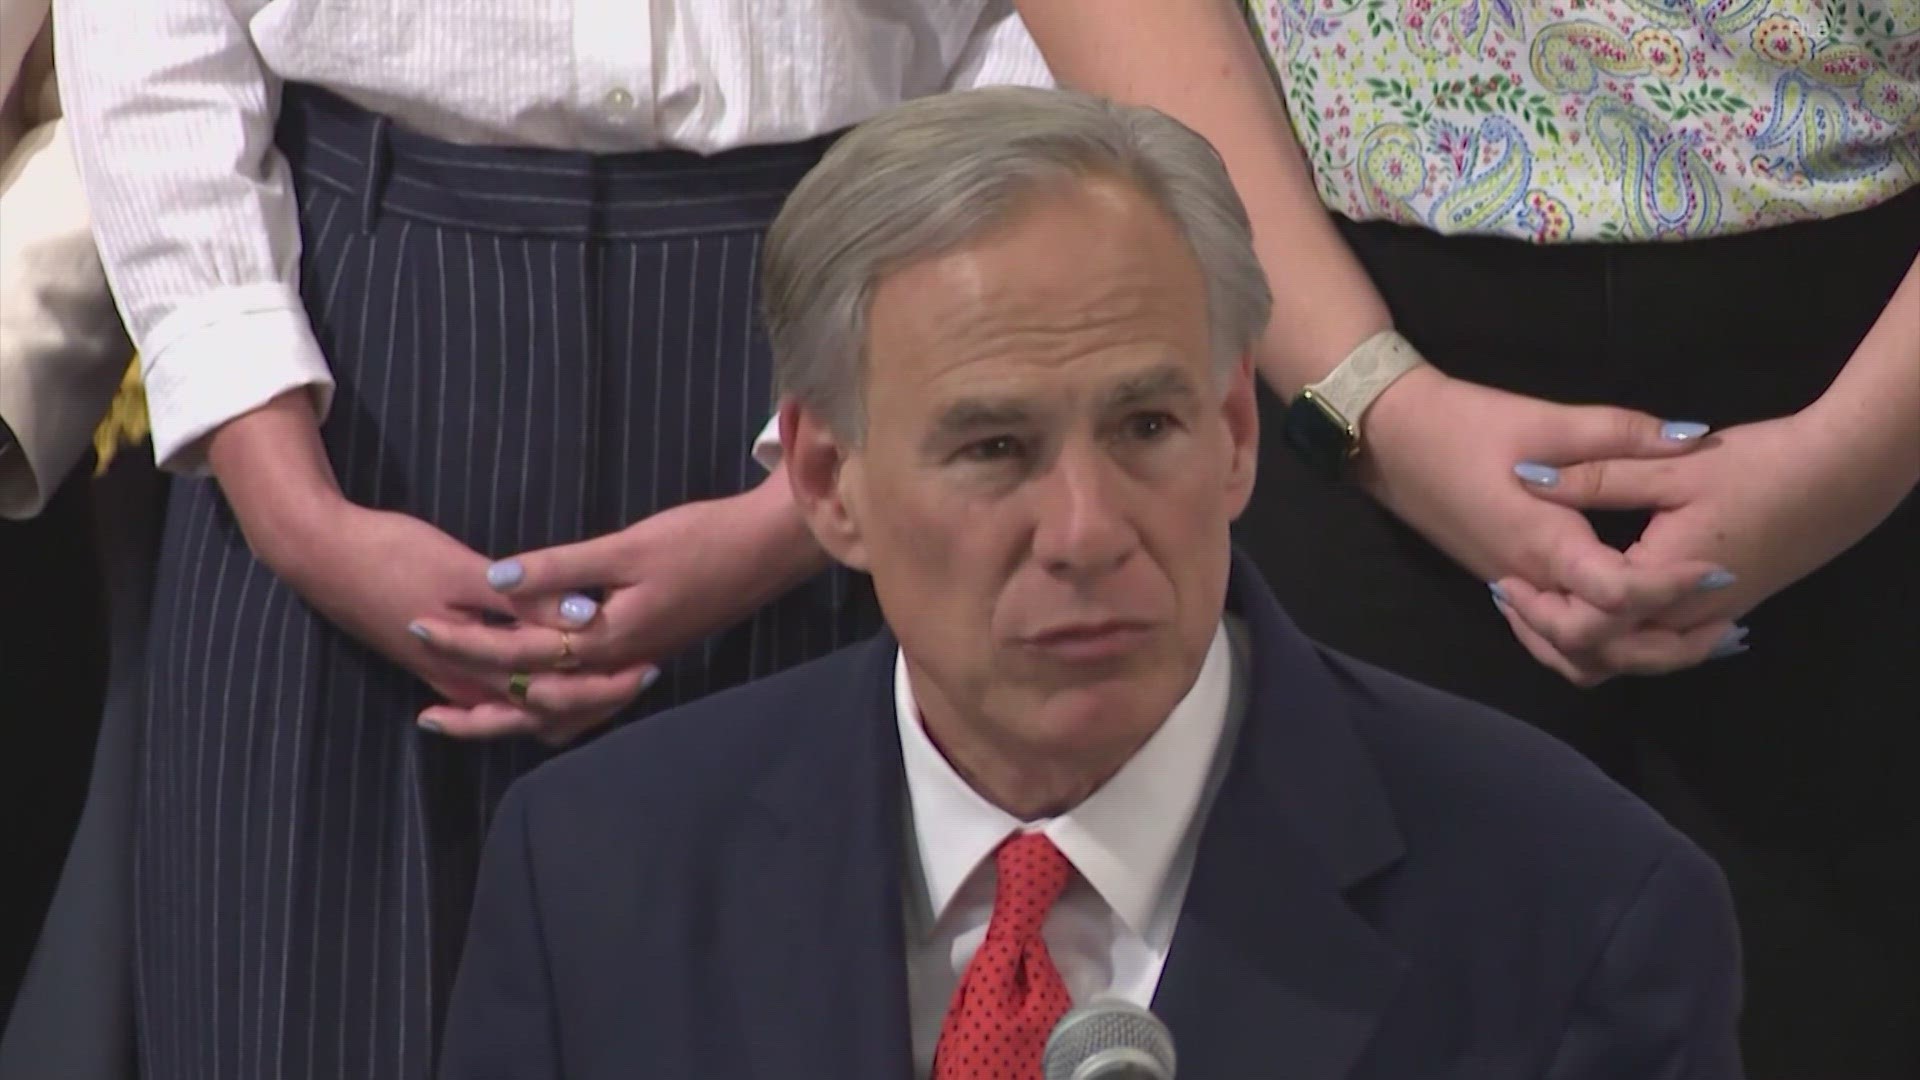 Gov. Greg Abbott said he would keep striking down bills because he believes property tax relief is the most important issue at hand.